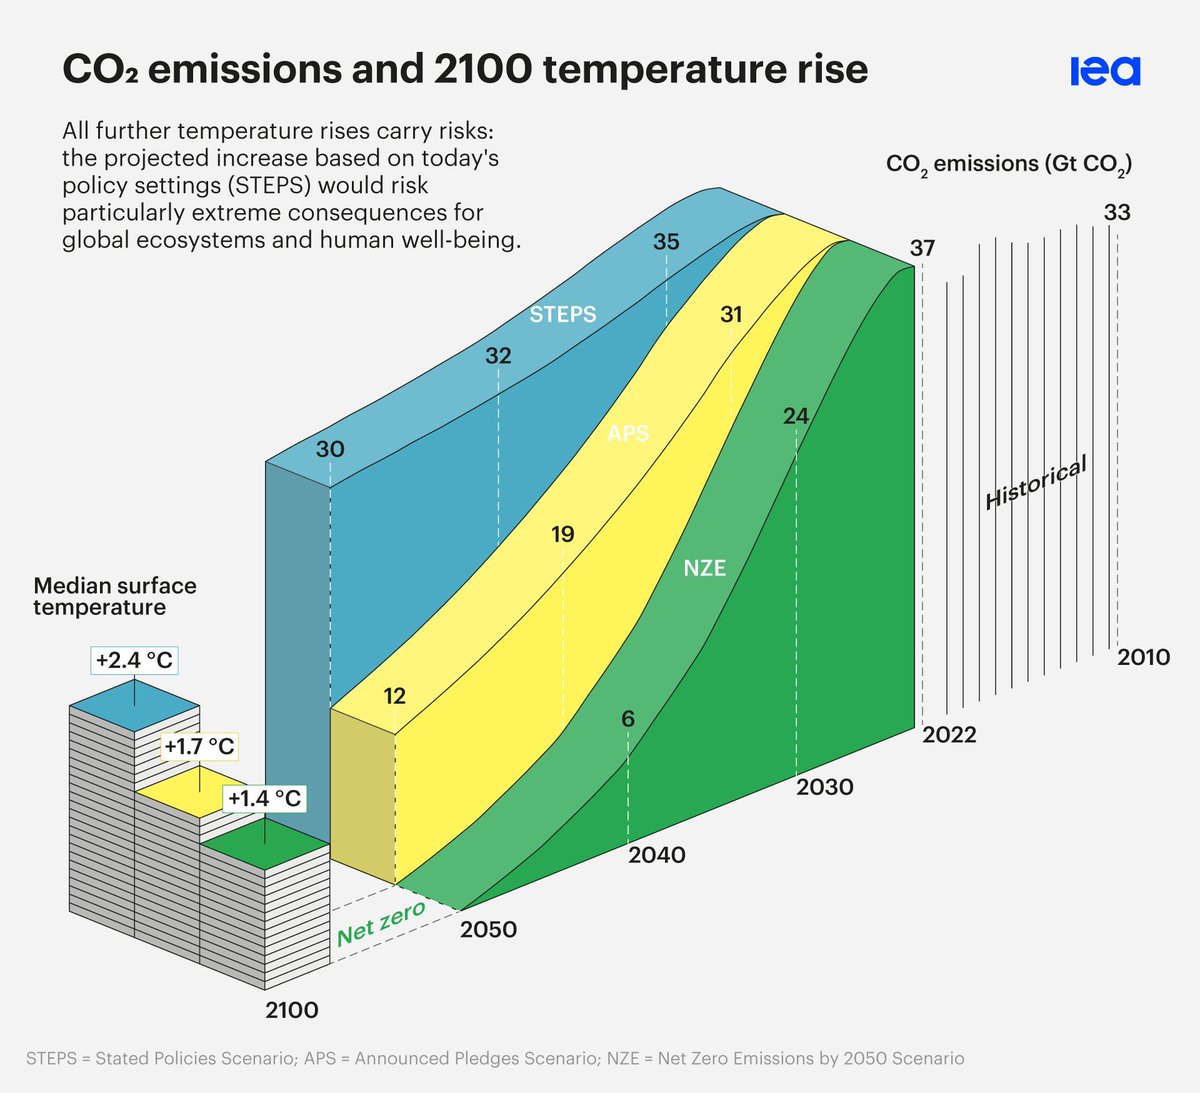 Under today's policy settings, the global temperature rise is set to reach 2.4°C in 2100 But if announced pledges are enacted fully, this drops to about 1.7°C And in our net zero pathway, temperatures peak mid-century & fall to around 1.4°C in 2100 ➡️ iea.li/3GATeM1